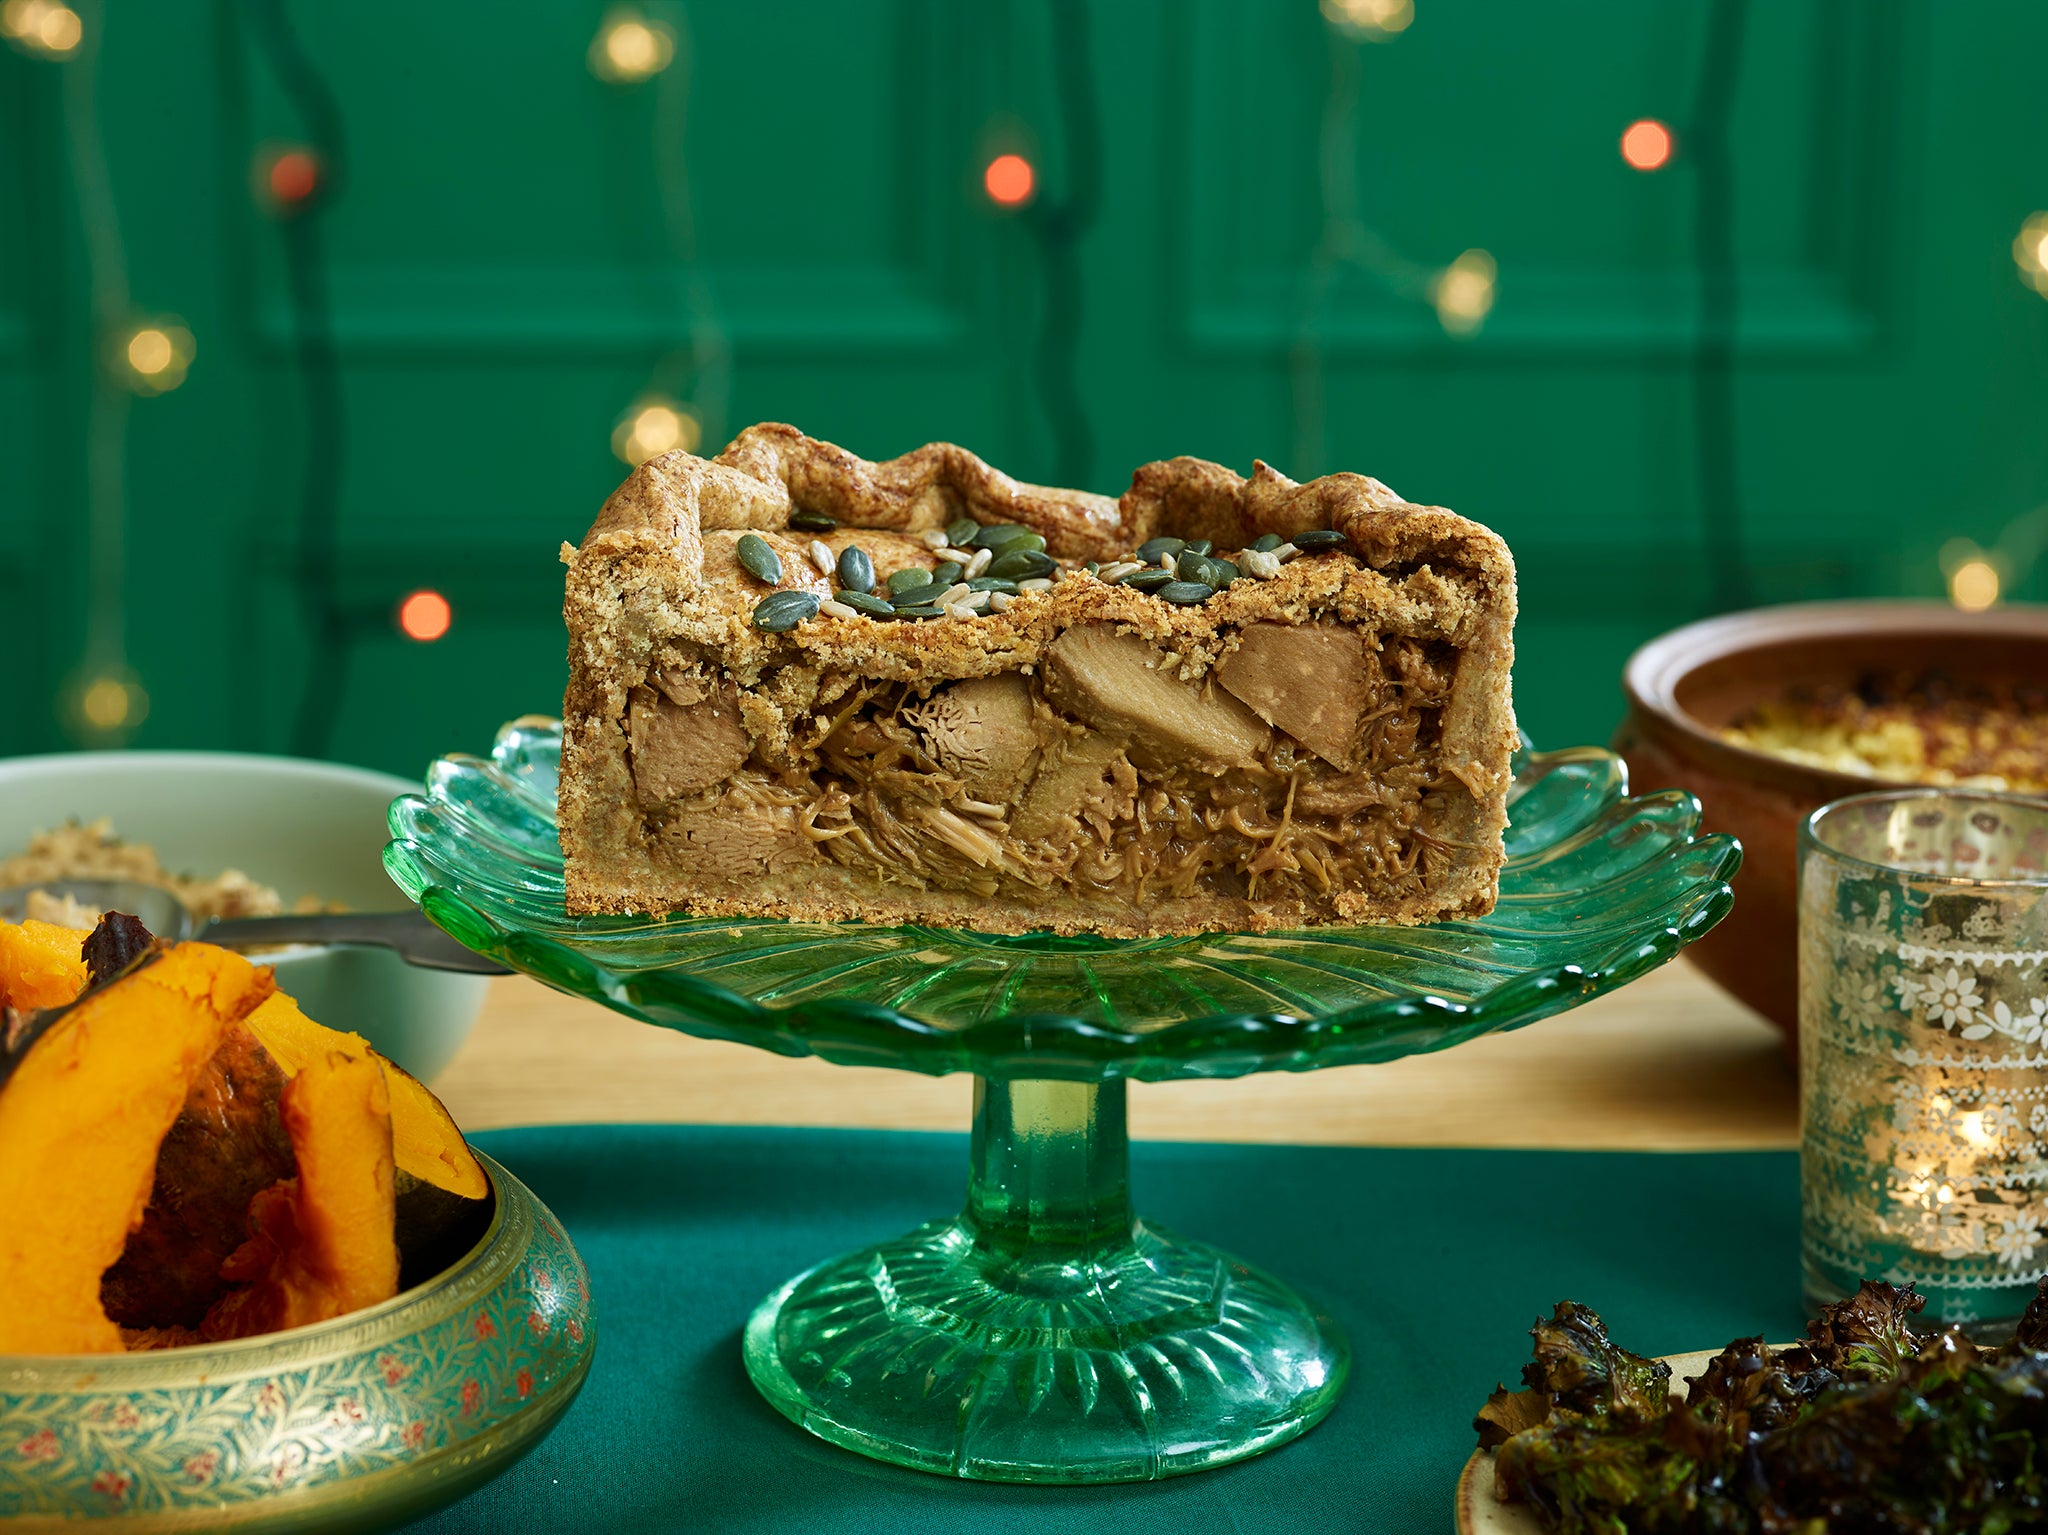 Tofu, seitan or, in this case, jackfruit could replace turkey as the centrepiece of Christmas dinner